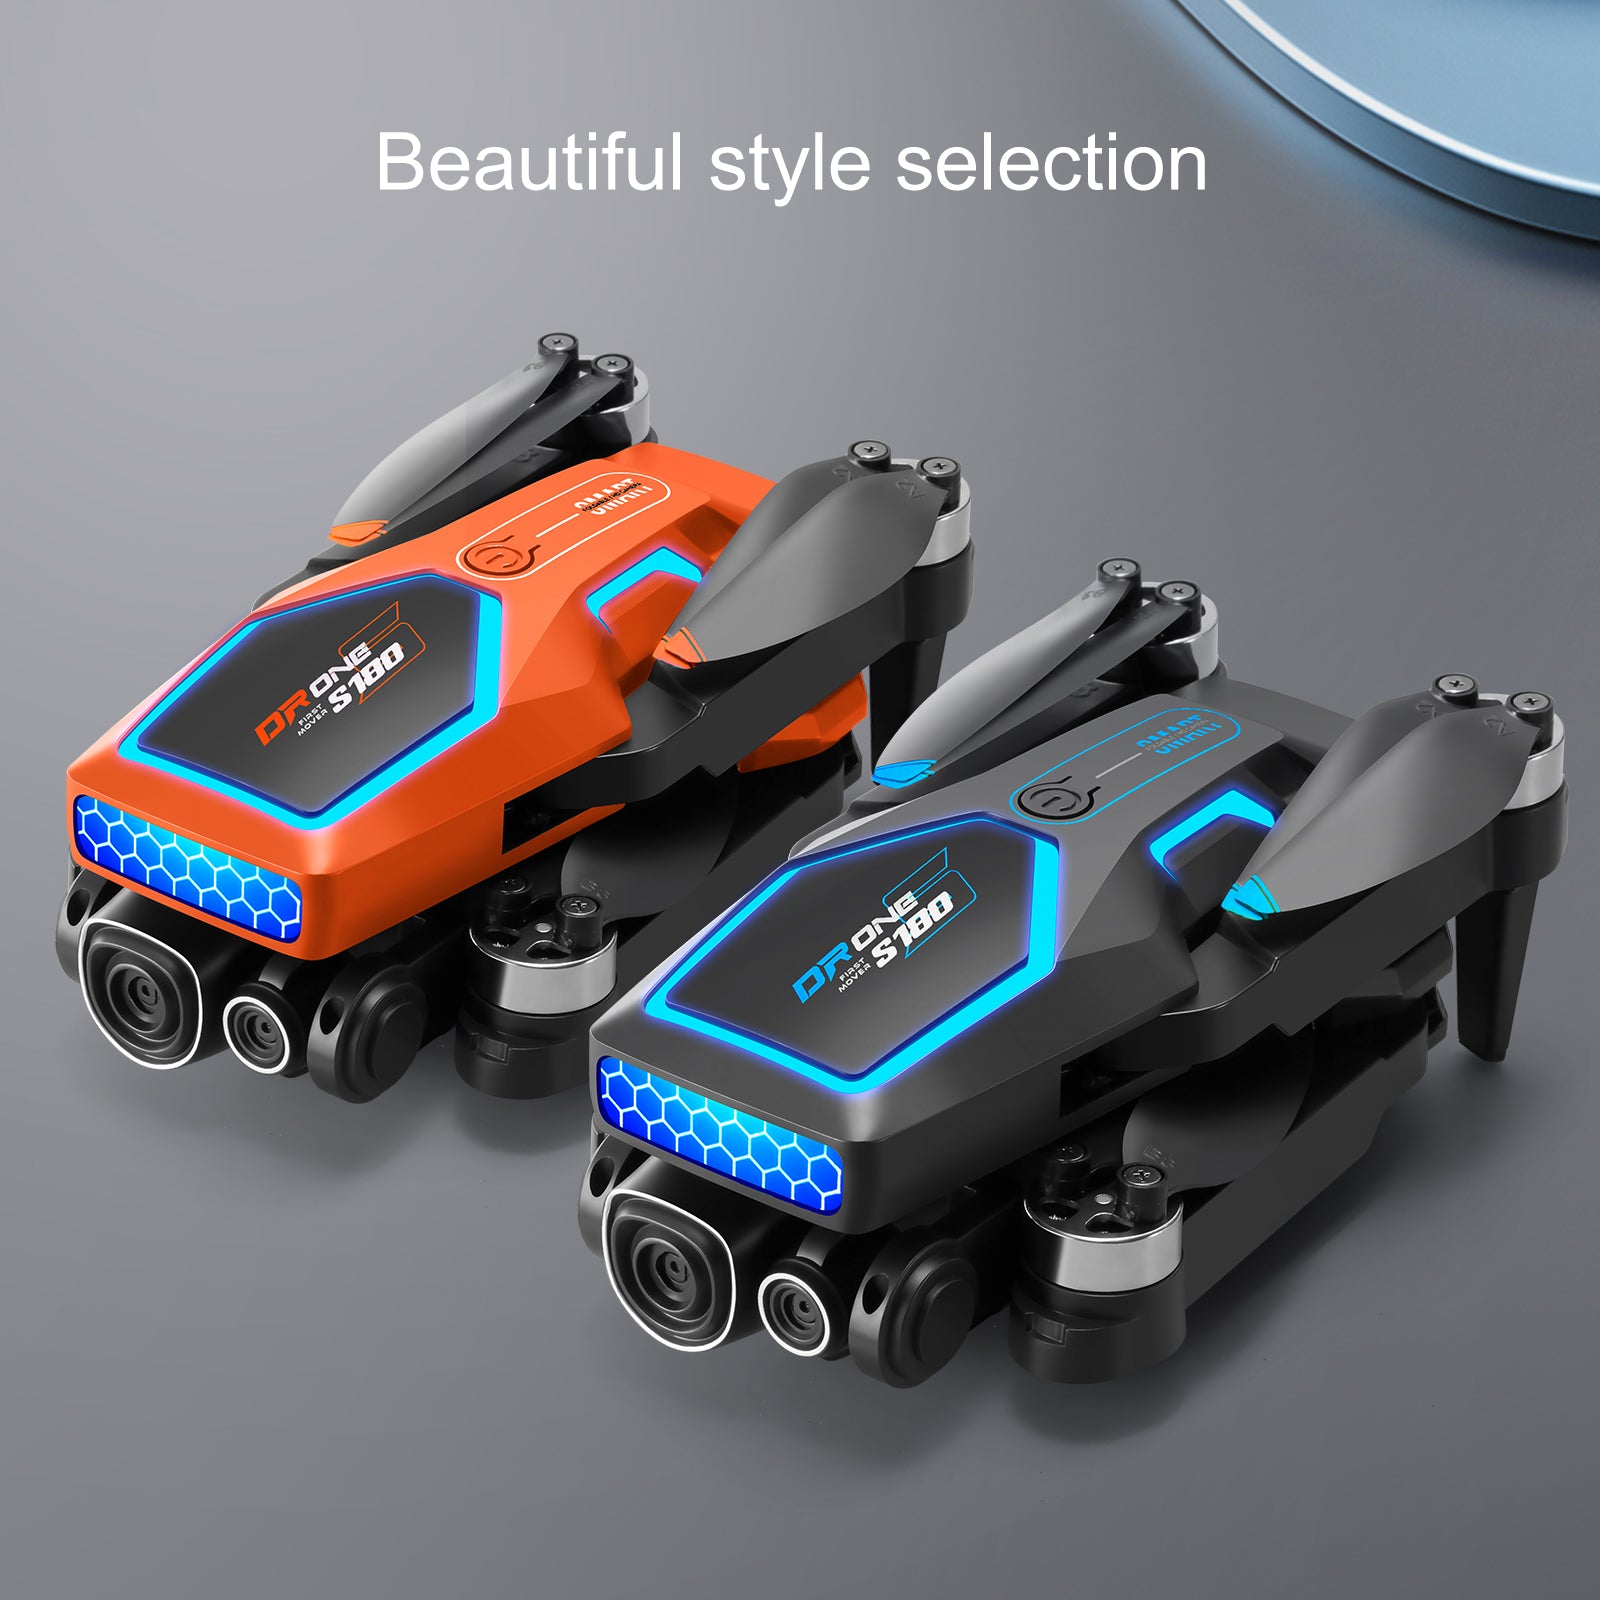 S180 Drone, Choose from four beautiful styles: One, Fifty-One, Forty-Eight, or Twenty-Five-Twenty.